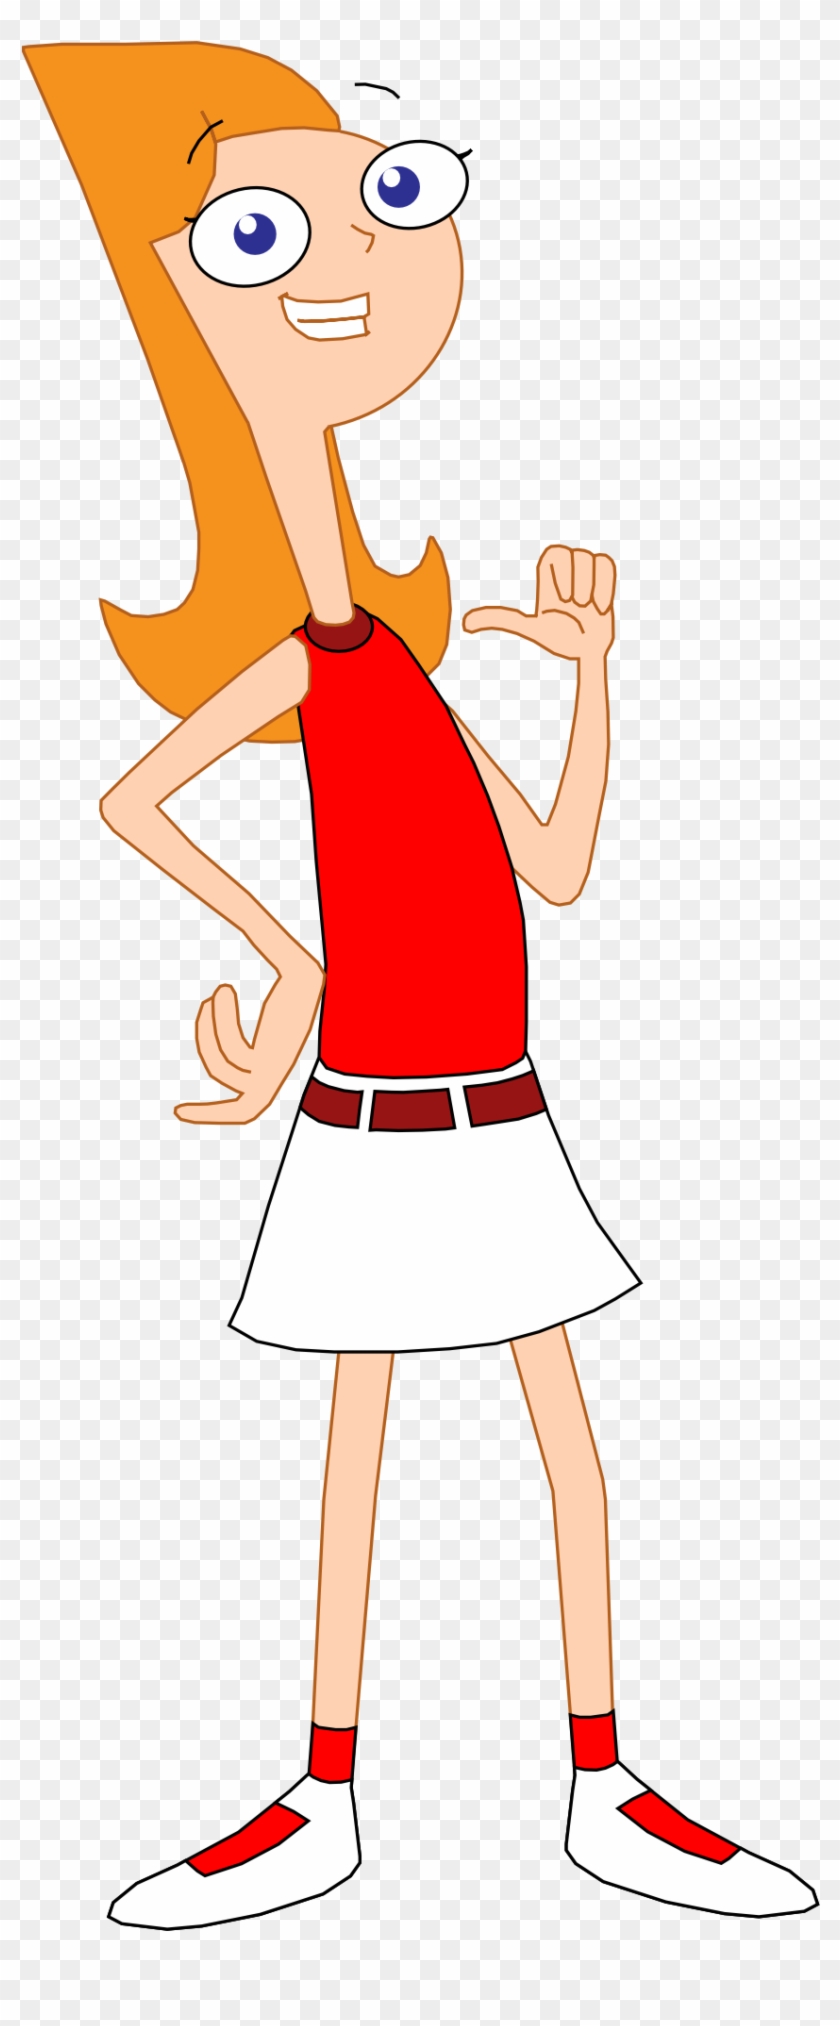 Candace Flynn - Phineas And Ferb Sister #849119